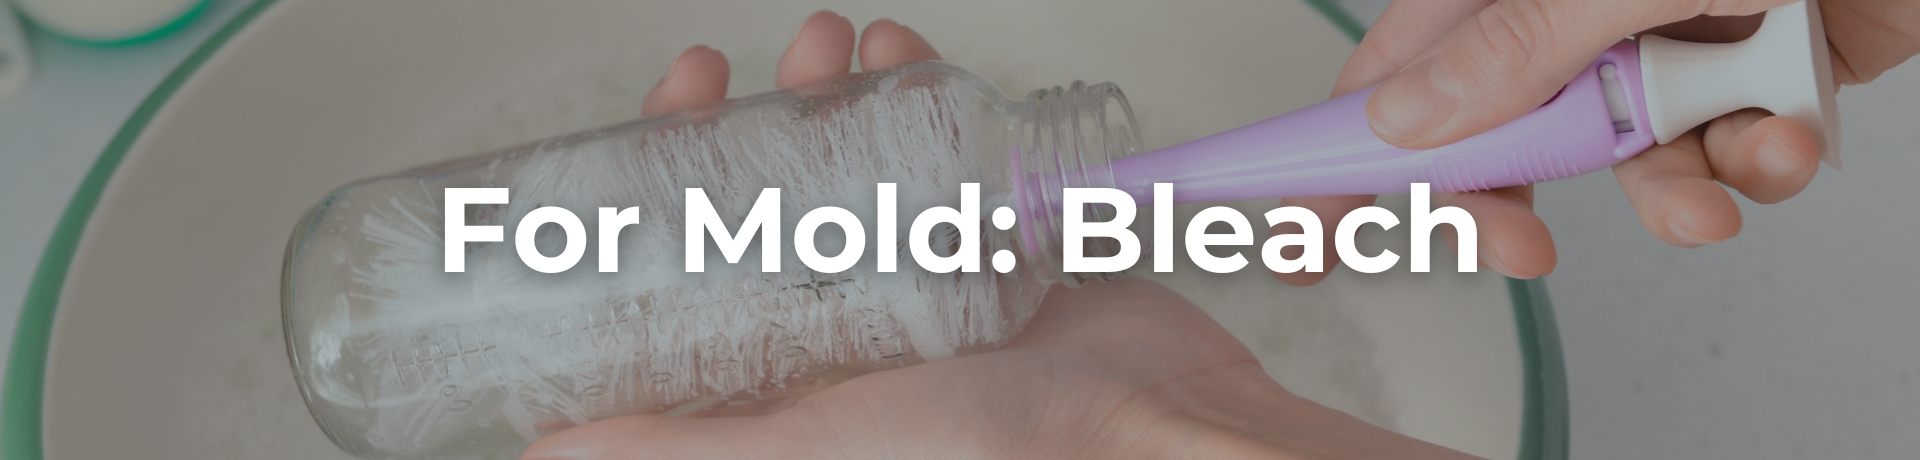 If your travel cup has mold - bleach instructions